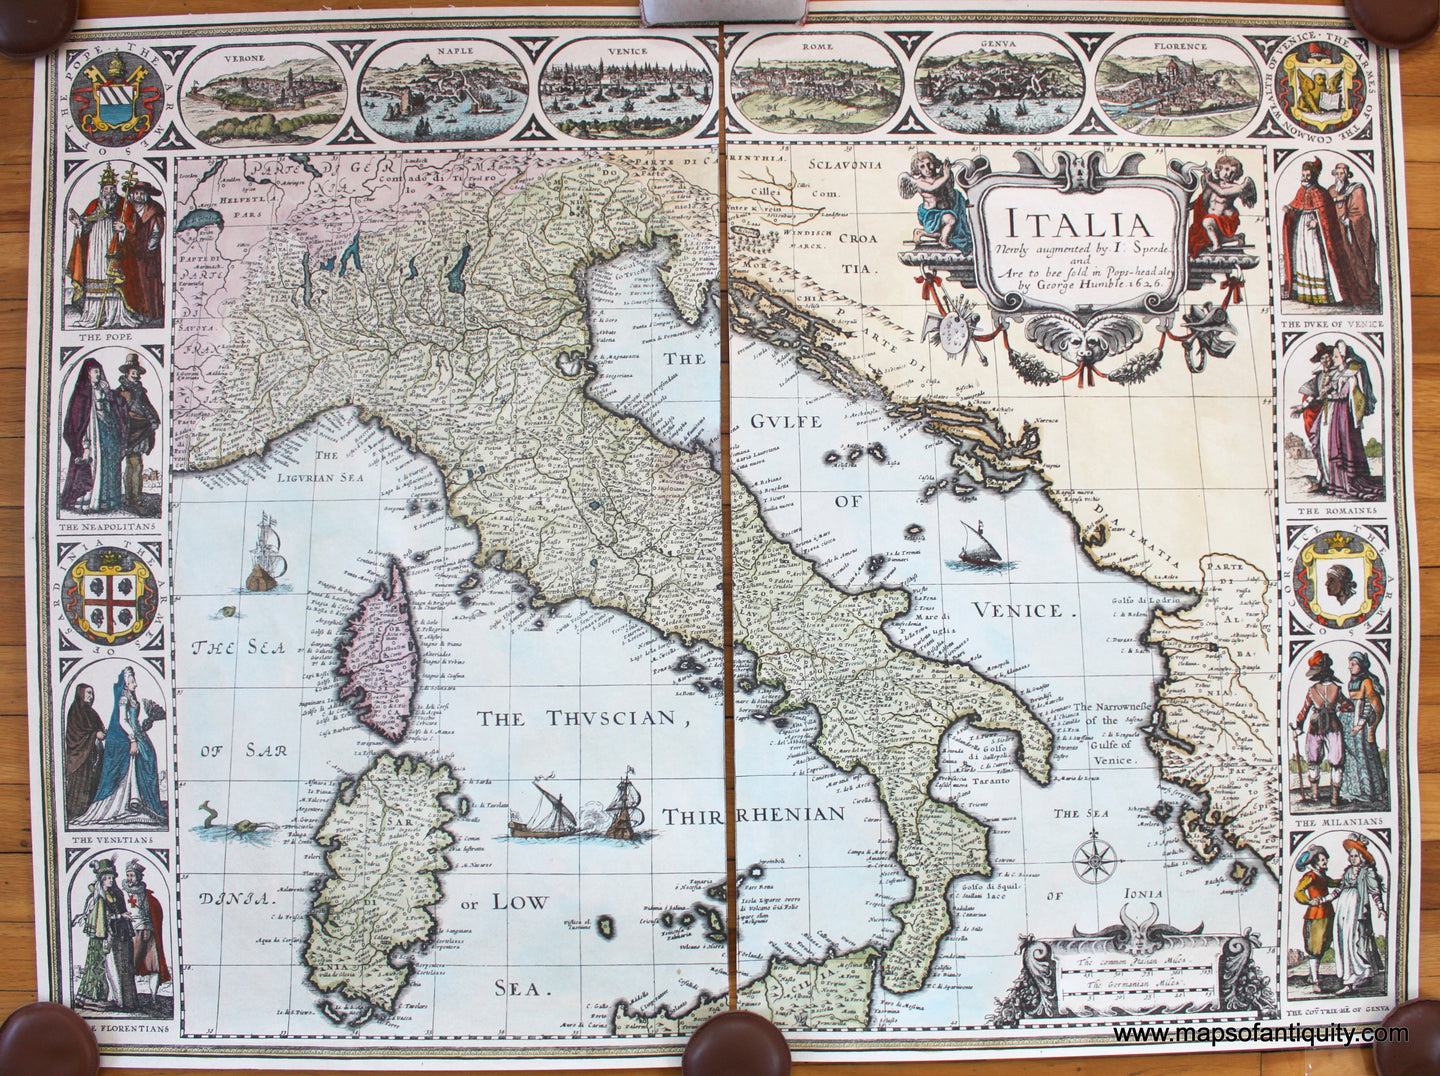 Maps-of-Antiquity-Digitally-Engraved-Specialty-Reproduction-Map-Italy-1626-John-Speed